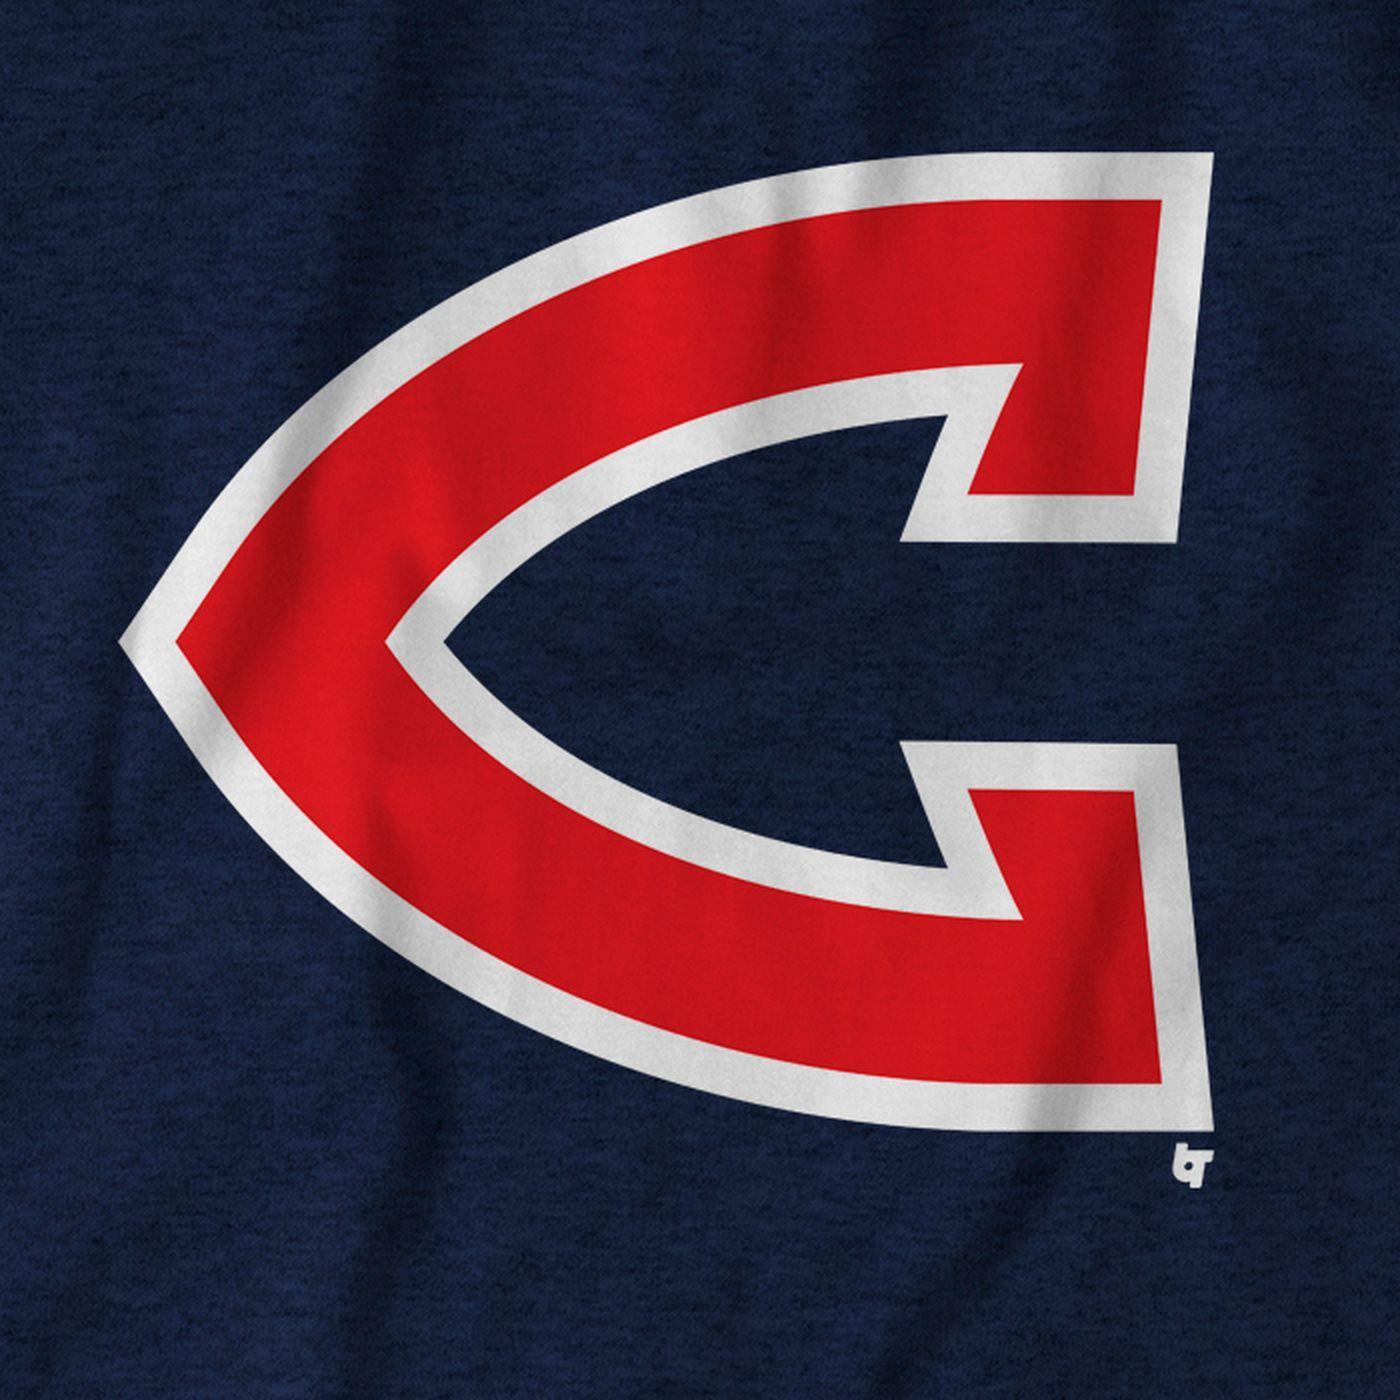 Cleveland Indians Logo - BreakingT has a new Indians logo idea and it's kinda great - Let's ...